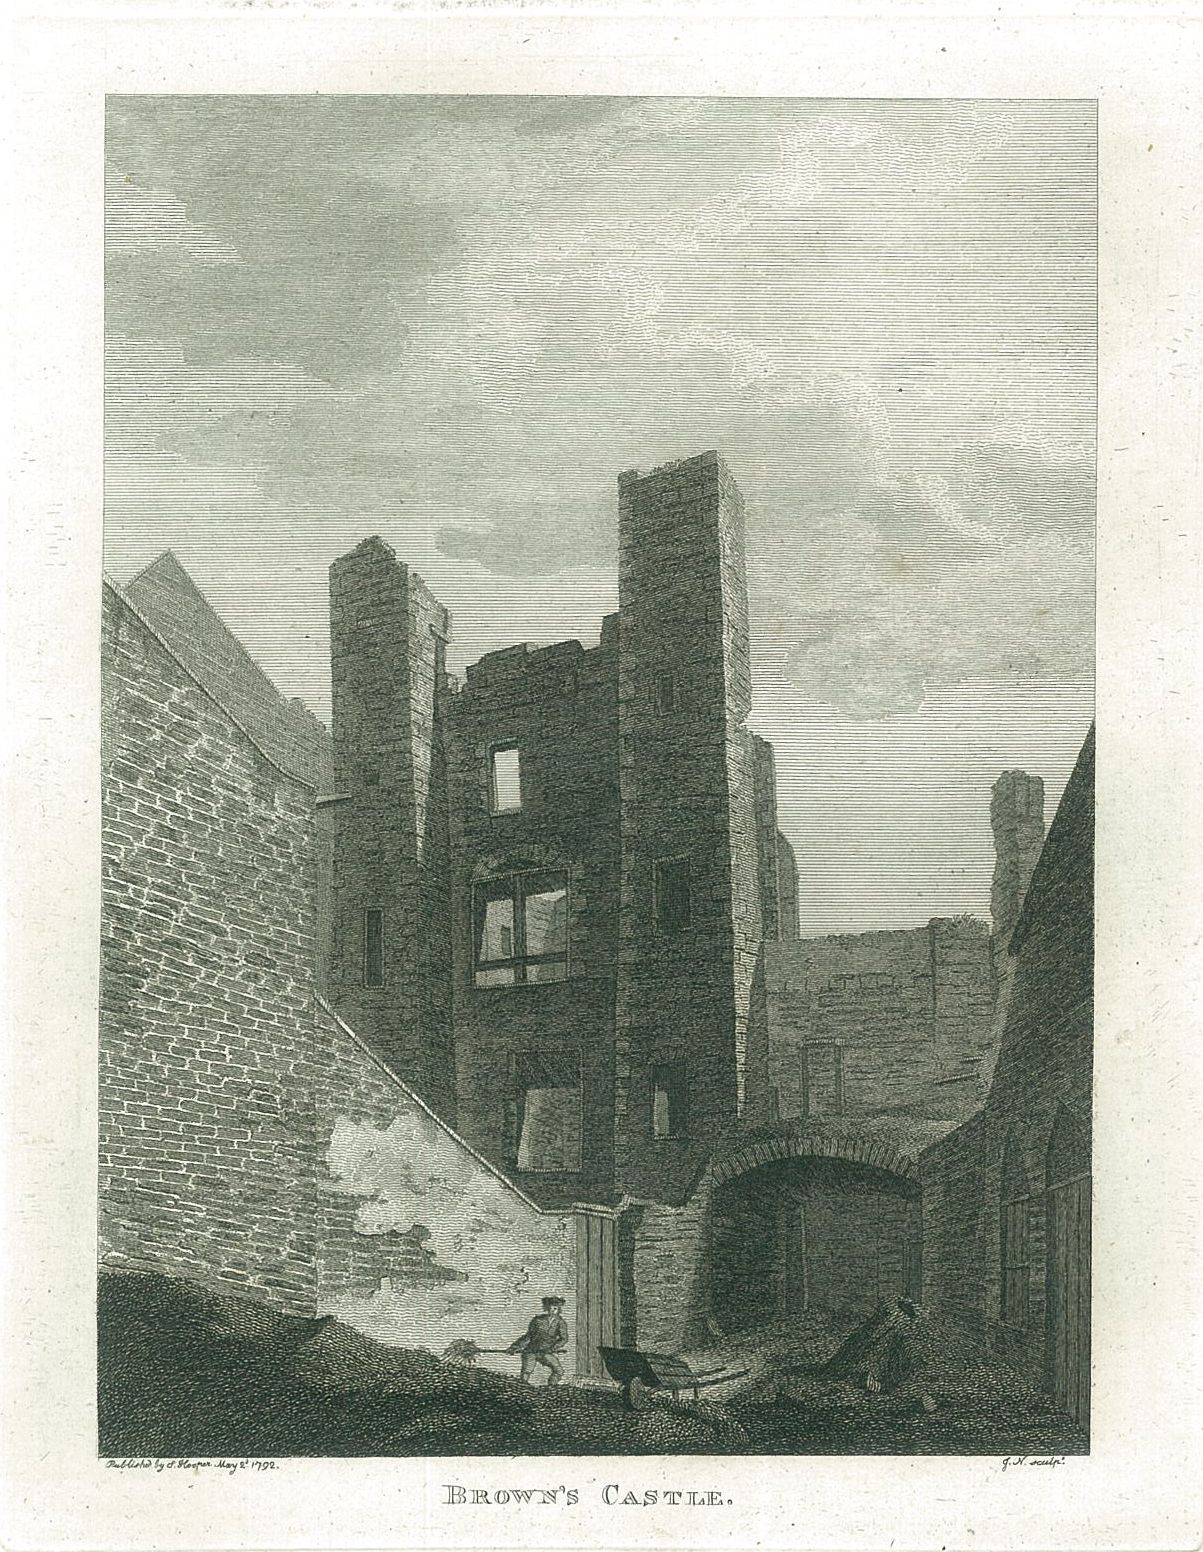 Engraving of the semi-ruinous Brown's Castle, a tower on the medieval walls of Dublin which once housed the notorious Black Dog Prison.